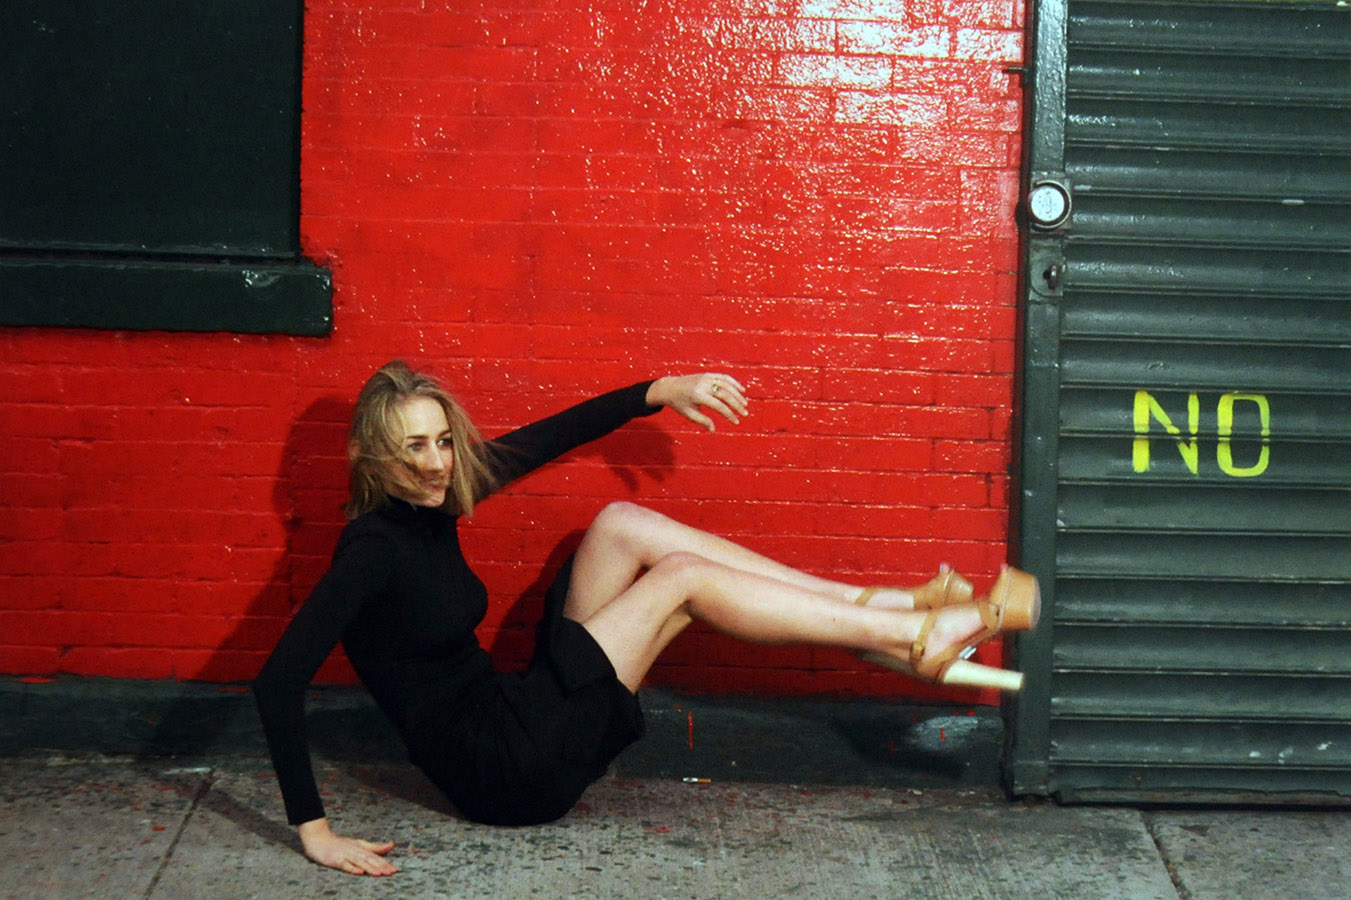 Photo of Vaneeesa Blaylock on her butt with hands and feet in the air, and wearing high platform heels, as though she's just slipped and fallen. Black mini-dress against brightly painted red brick wall